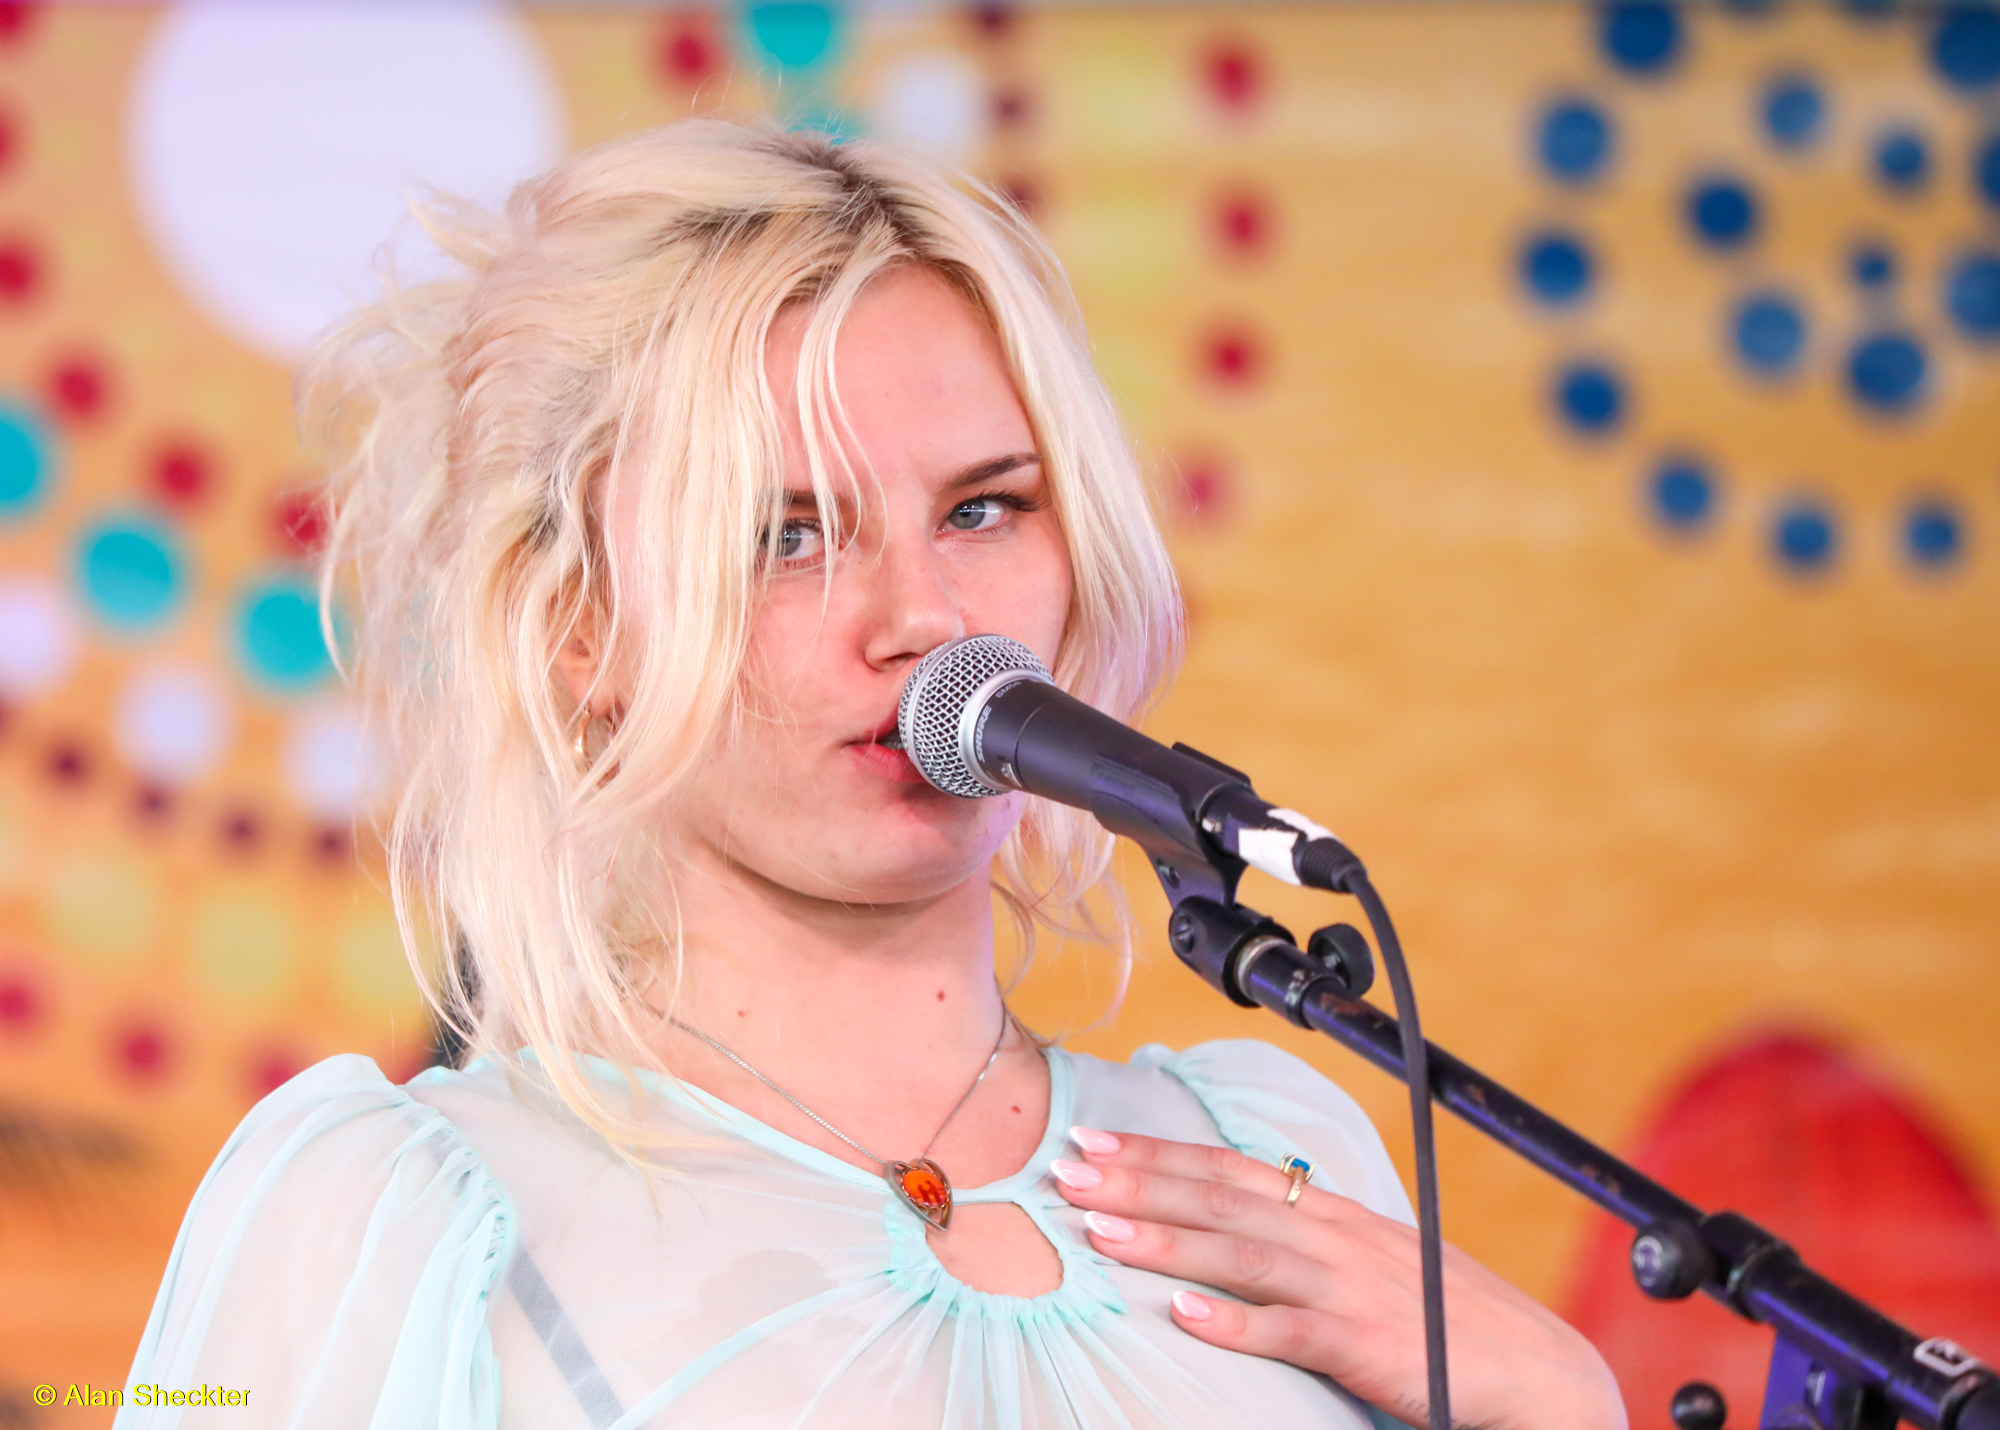 Grace McKagen at the Riptide stage on Saturday